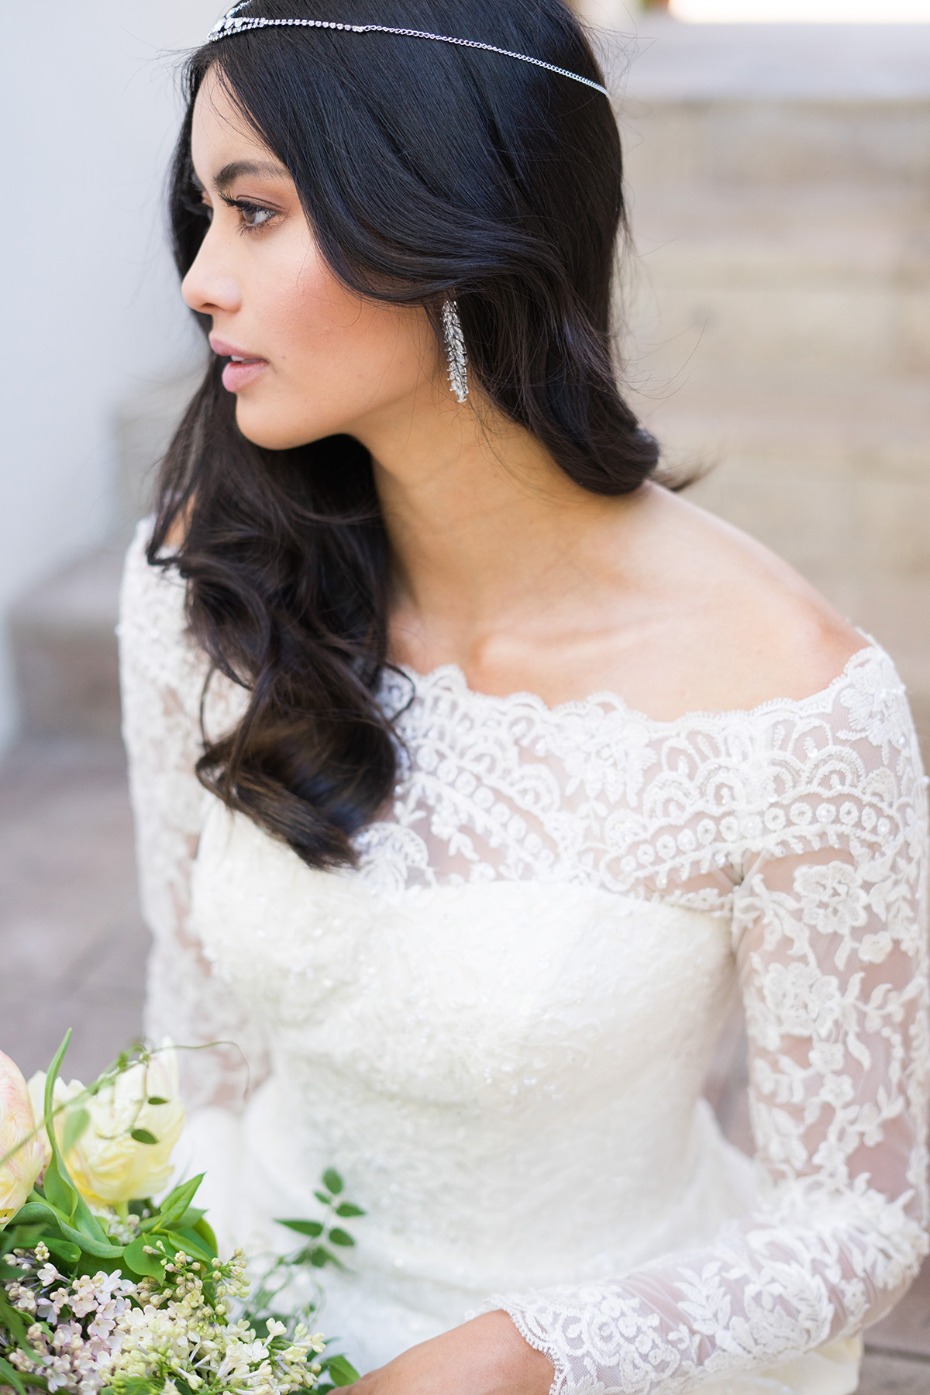 Traditional and Timeless: David's Bridal Wins With Both